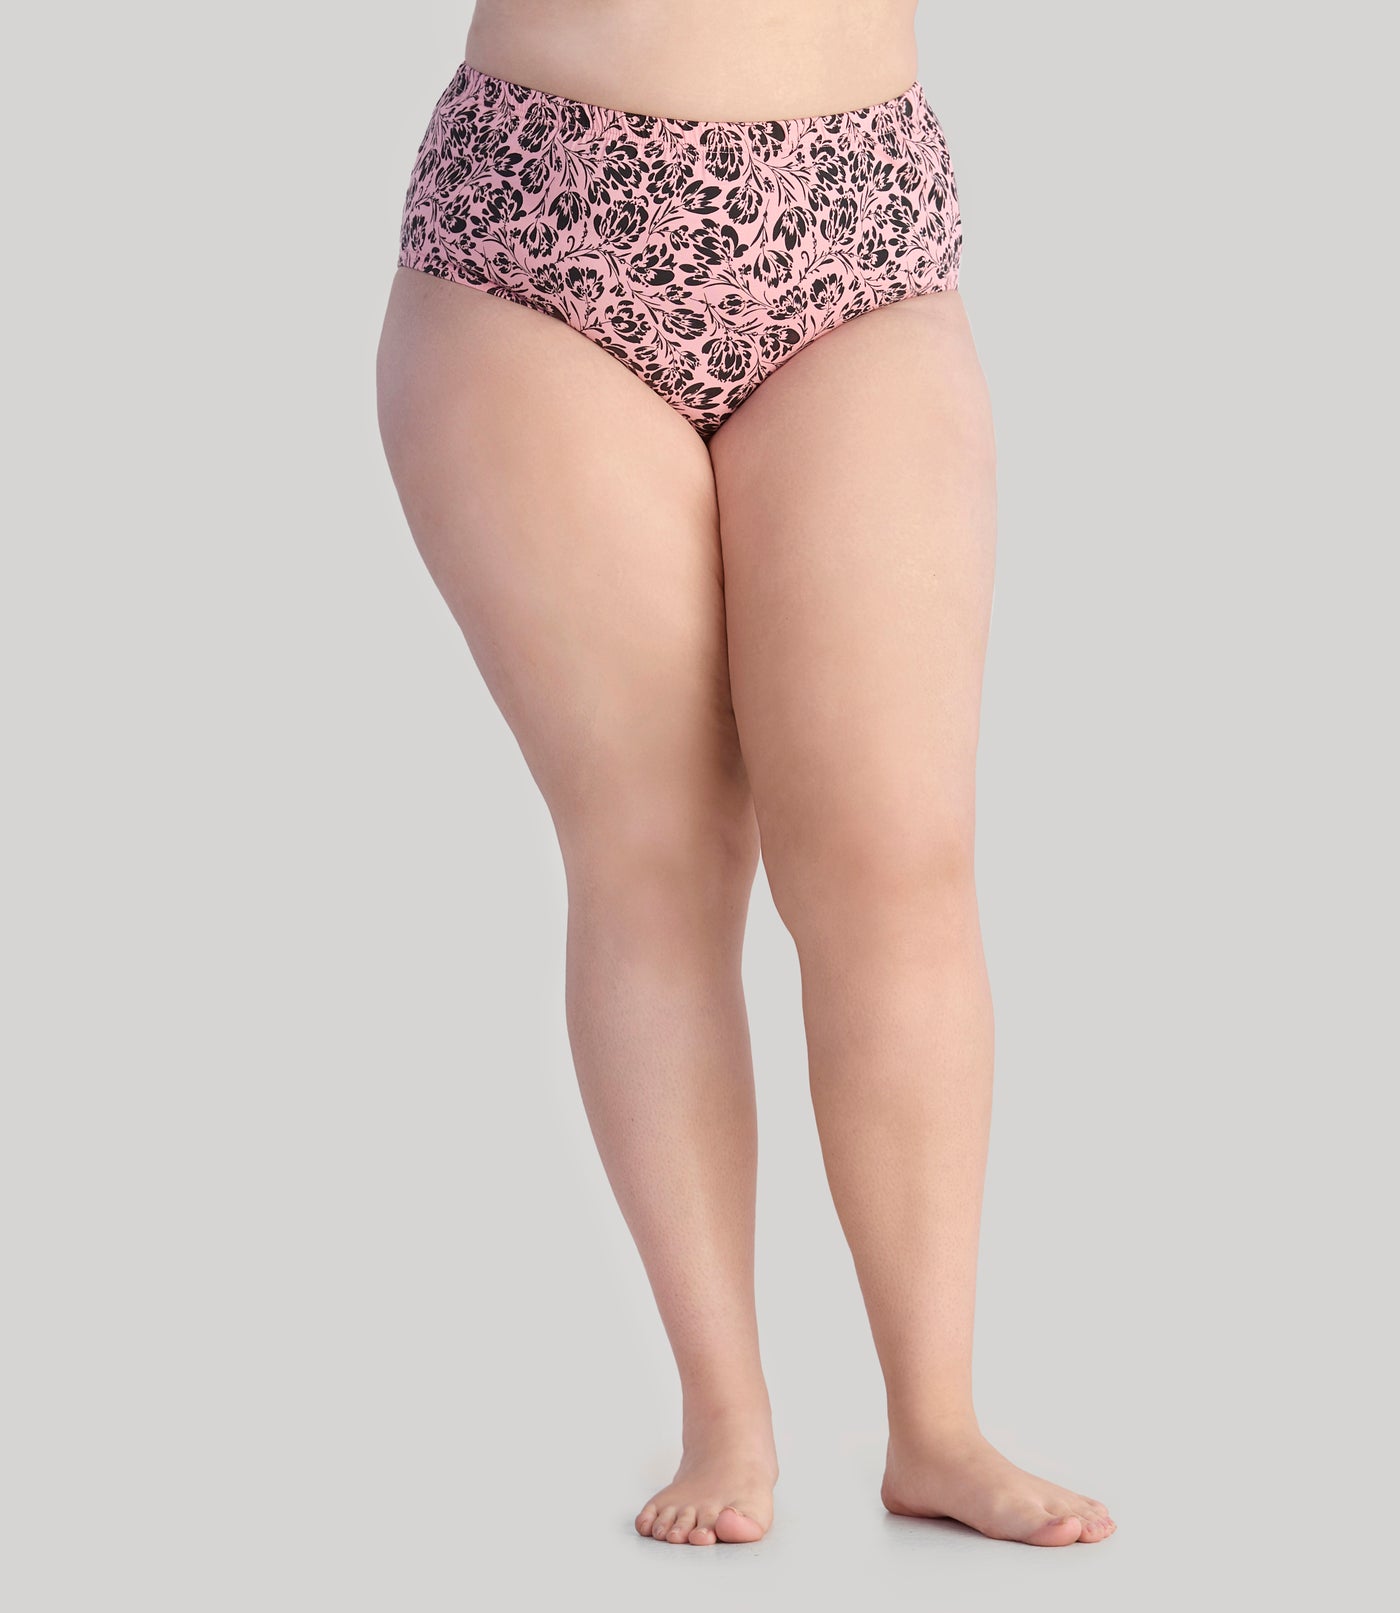 Model, facing front, Junowear Cotton Stretch Classic Brief Flower Prints in color pink and black flowers.